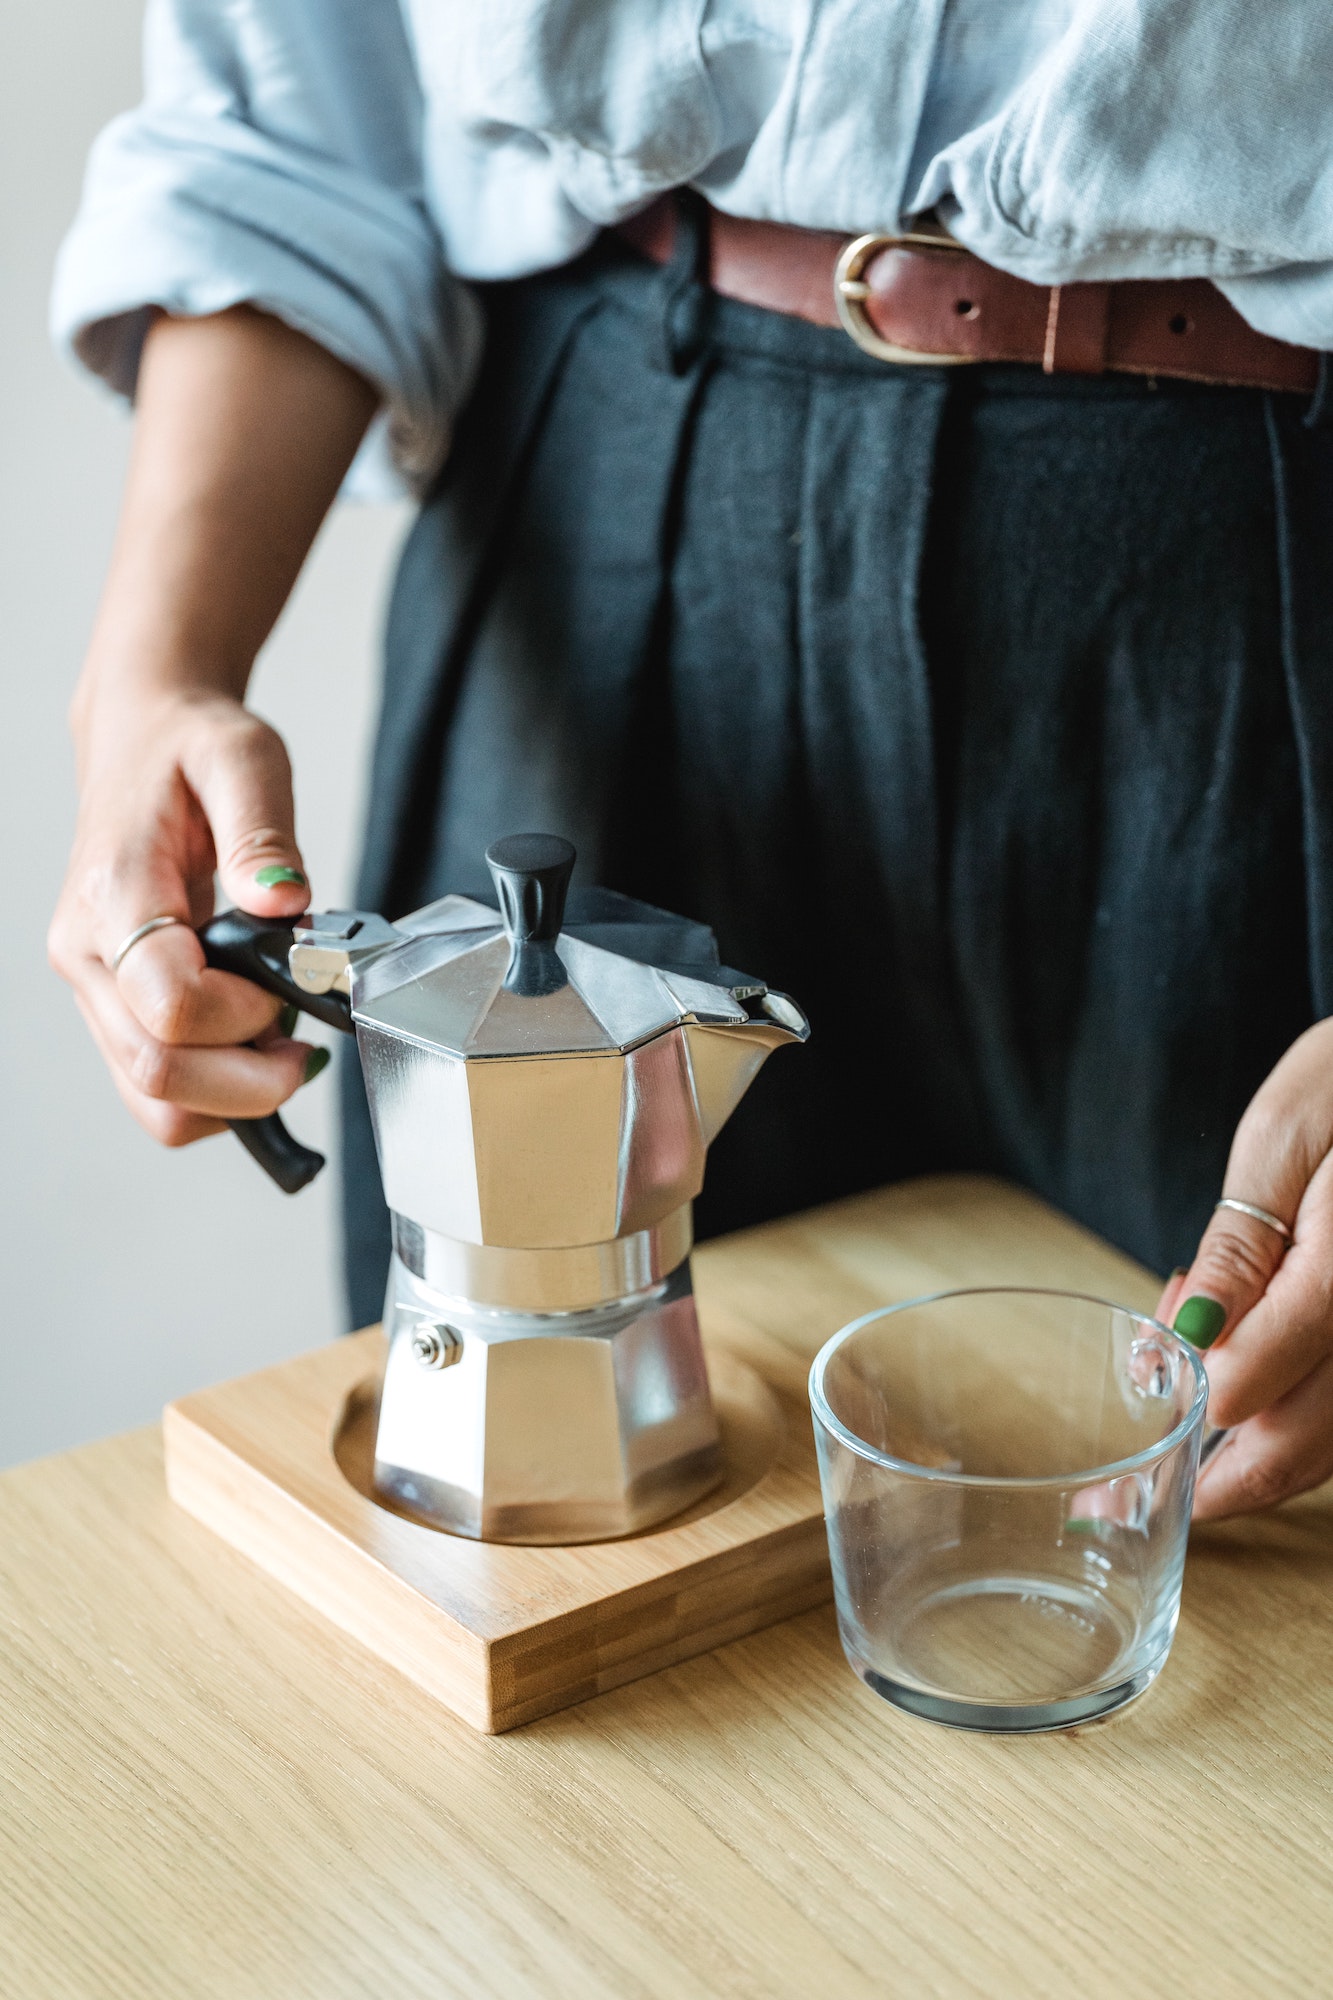 The iconic Moka pot was invented in 1933, and has since become a staple of every Italian household